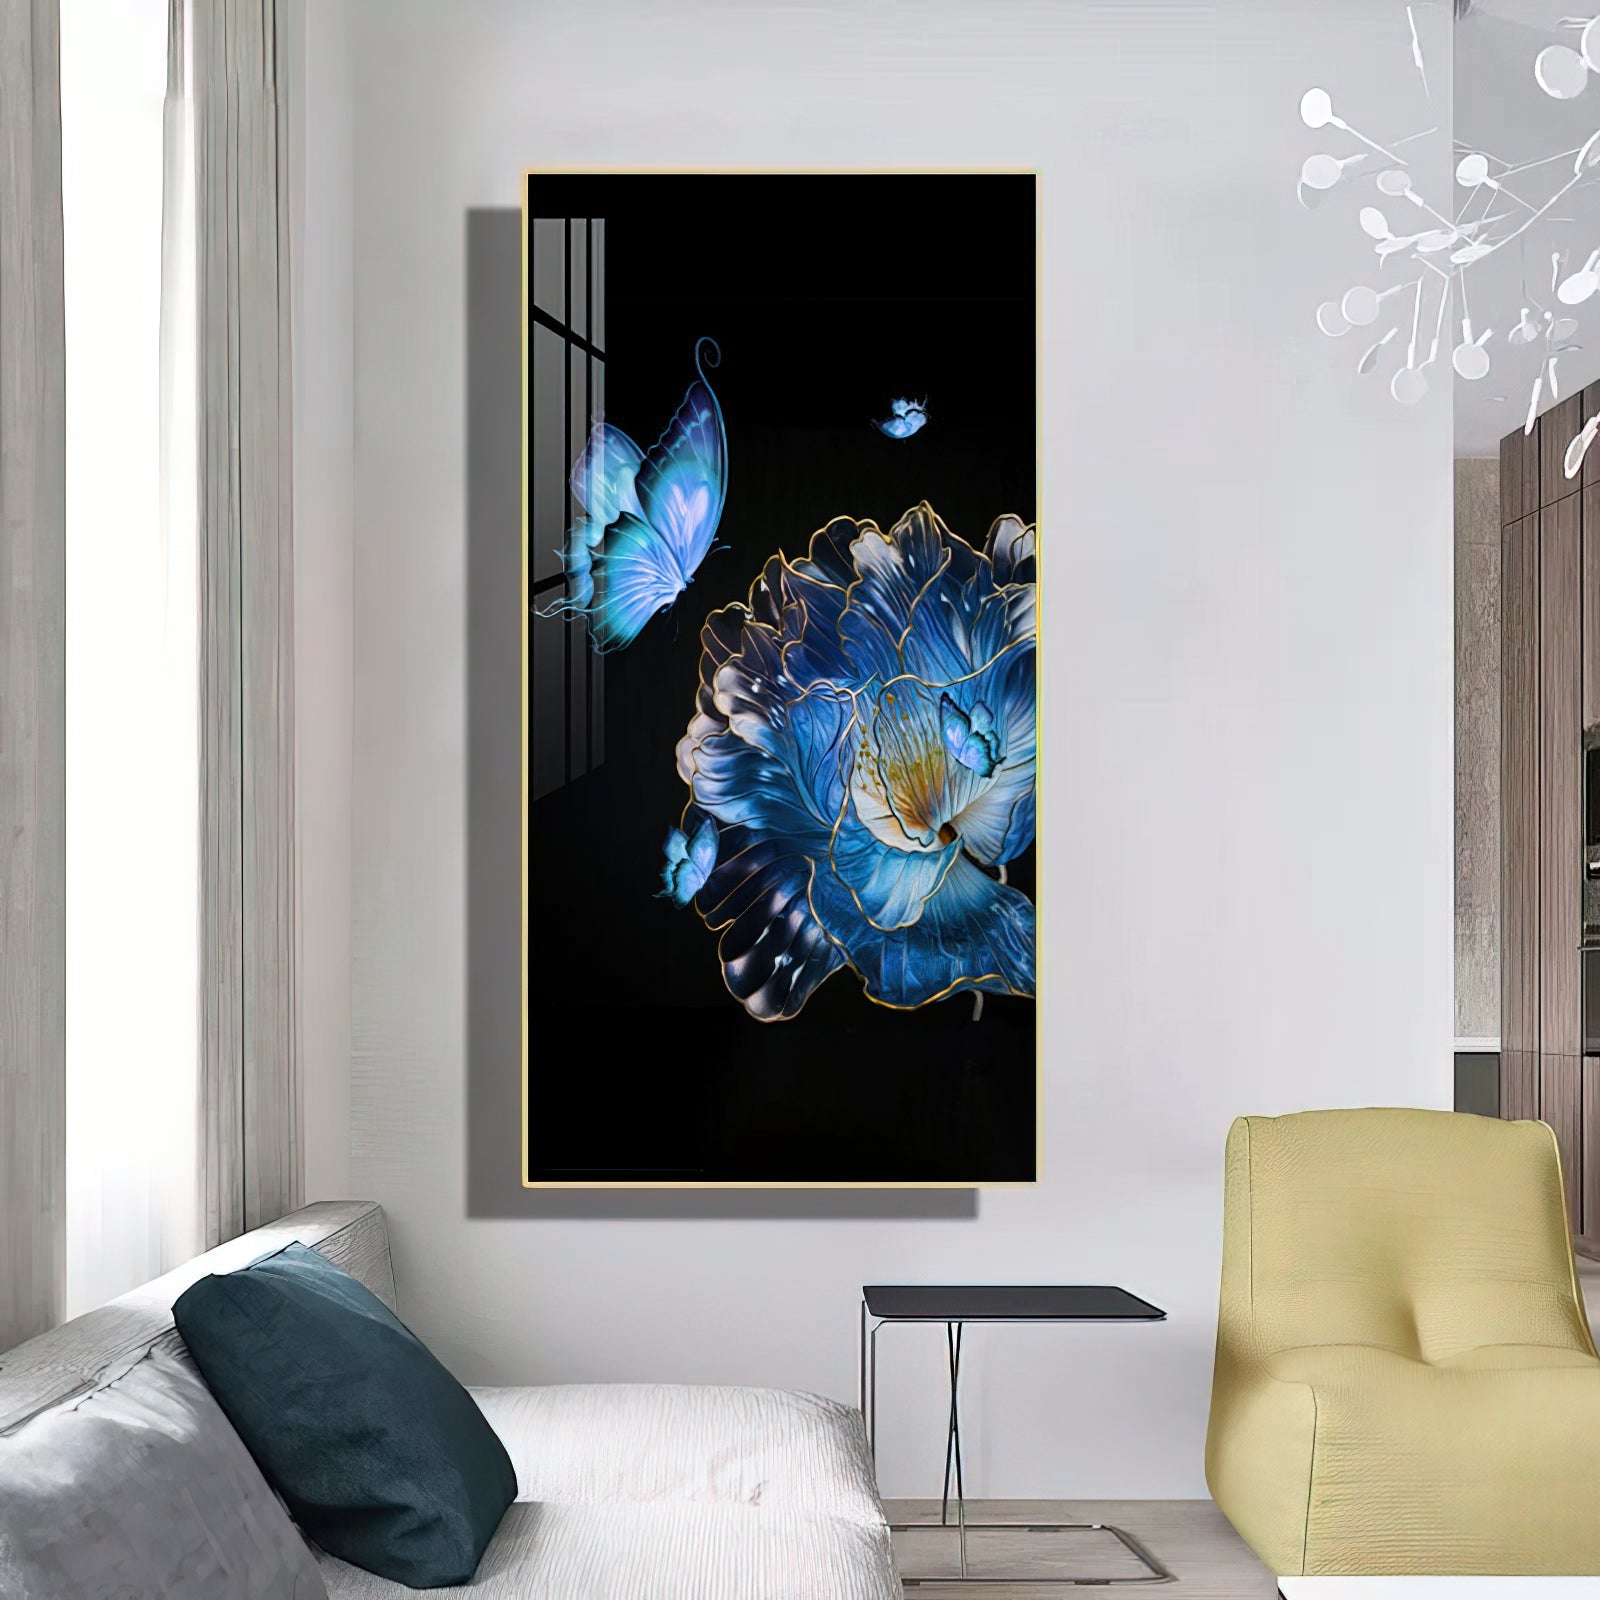 Bluish Dark Theme Abstract Wall Painting - 50x100 cm Art Piece Home Decor crystal porcelain Framed Large wall wall art wall accents